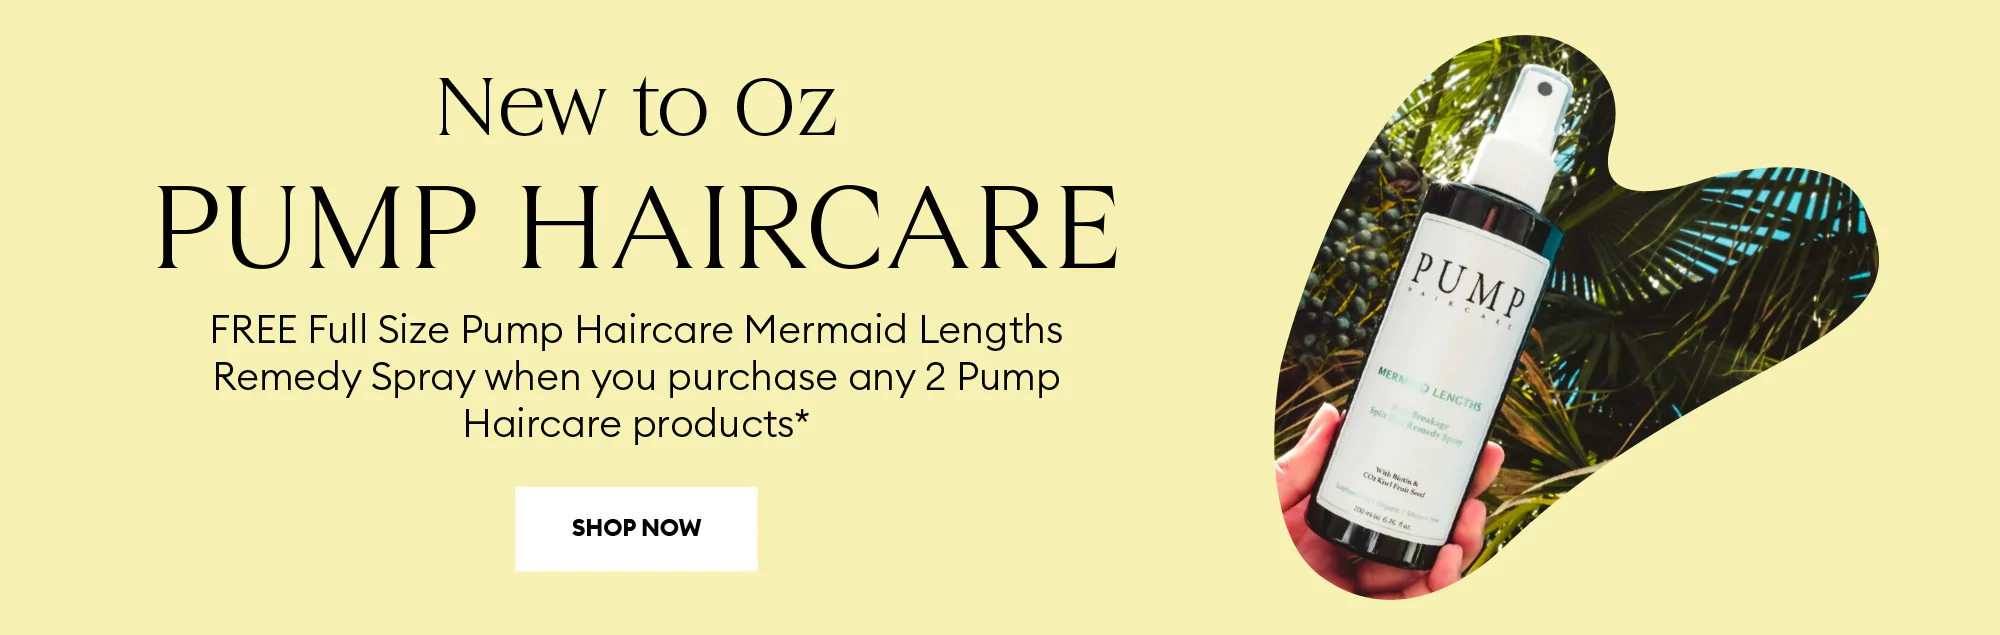 Free Pump Haircare Mermaid Remedy spray when you purchase any 2 pump products